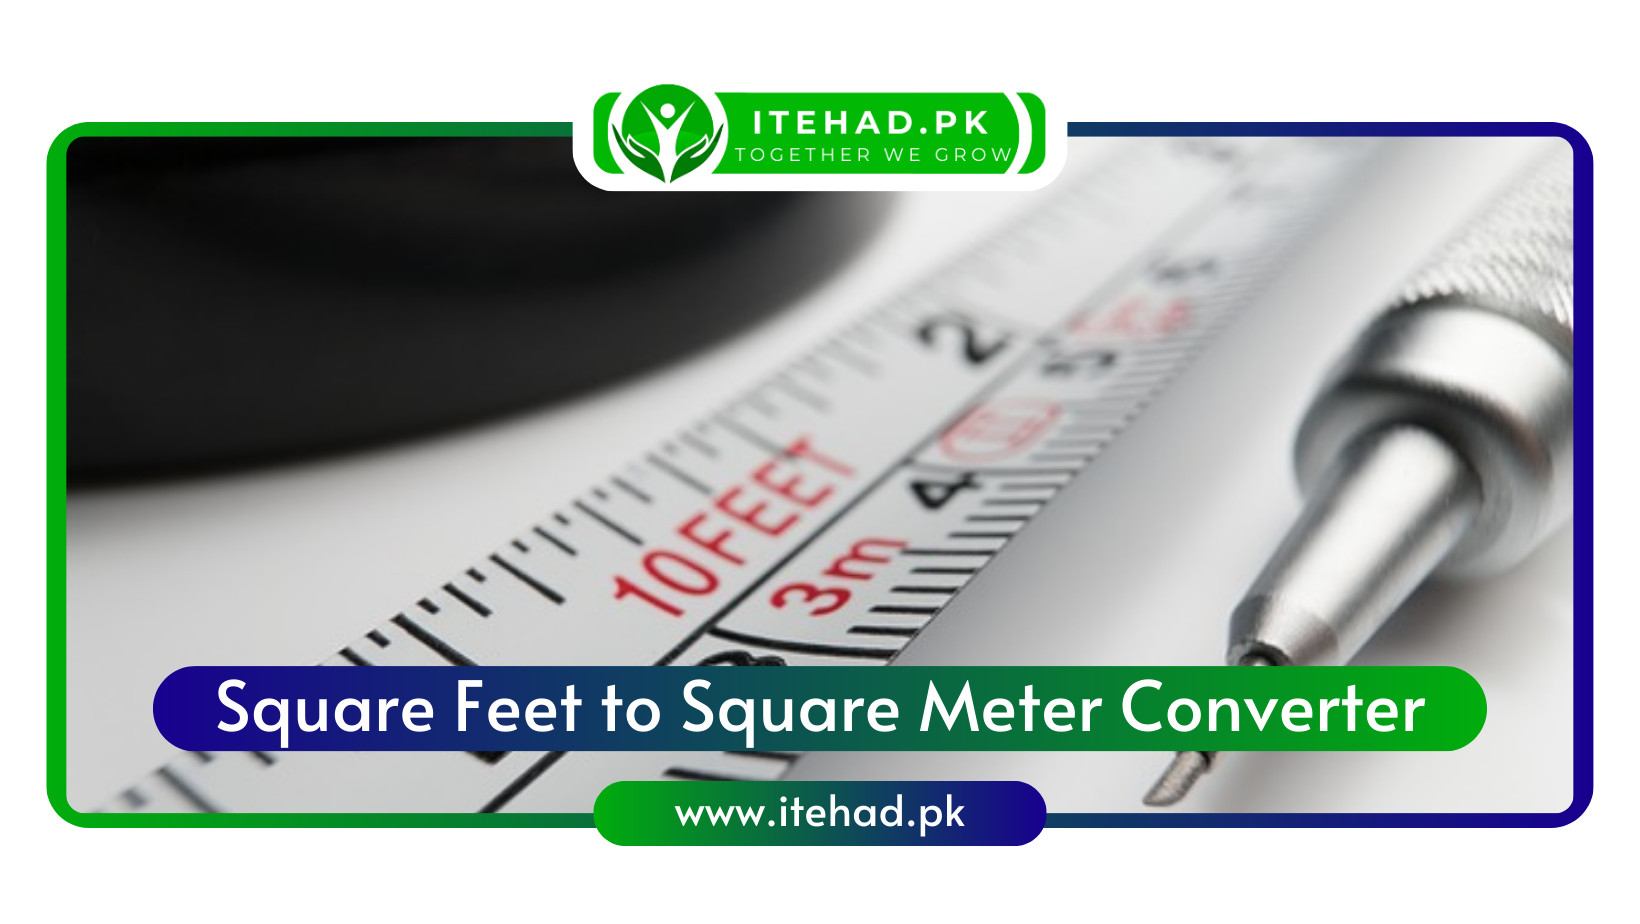 Square Feet to Square Meter